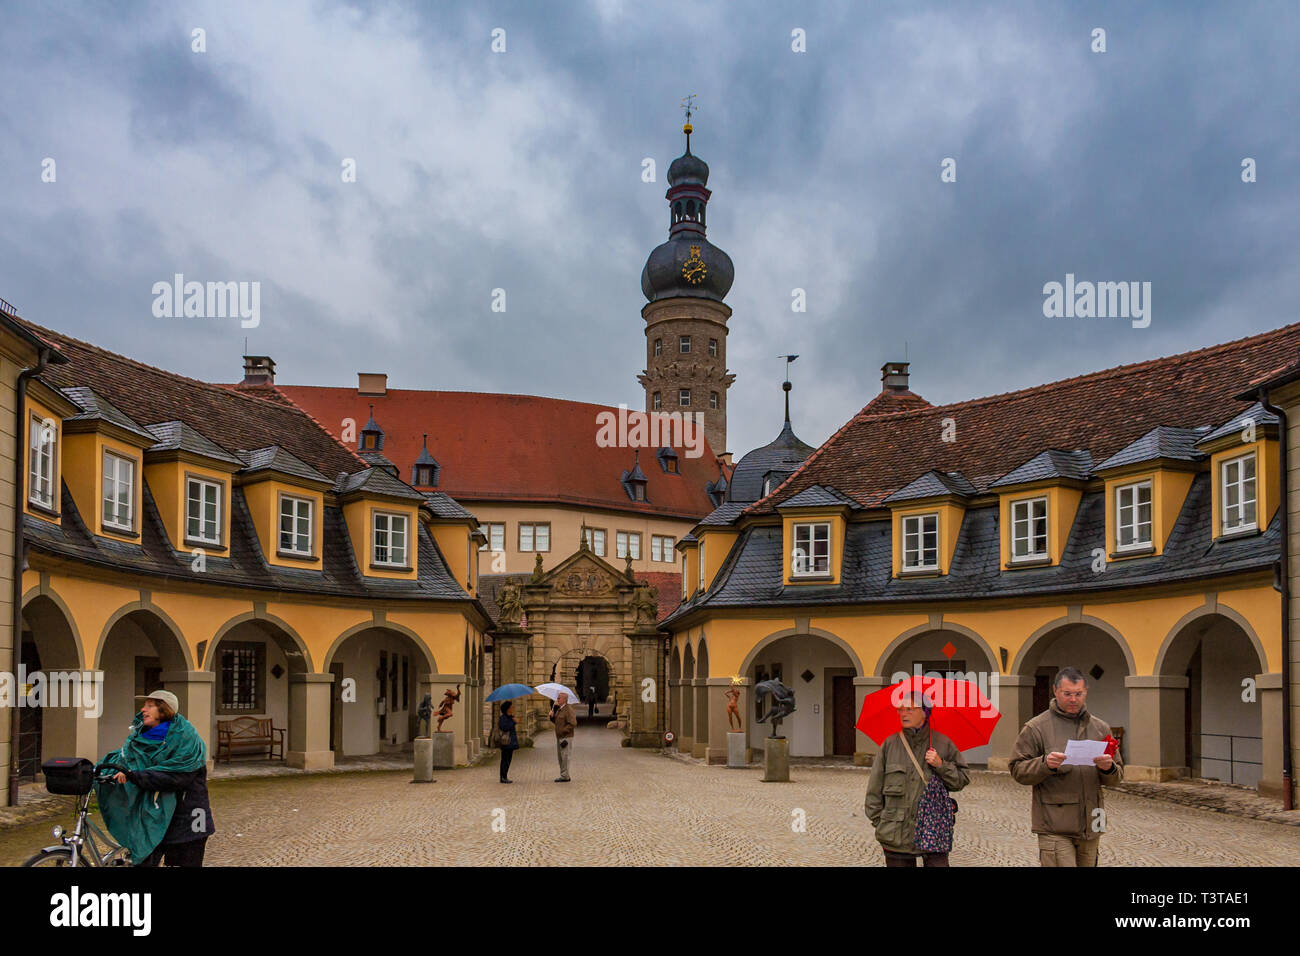 Weikersheim, Germany - MAY 2010: People with umbrellas standing in front of the cobble stoned baroque entrance to the famous Weikersheim Palace with... Stock Photo